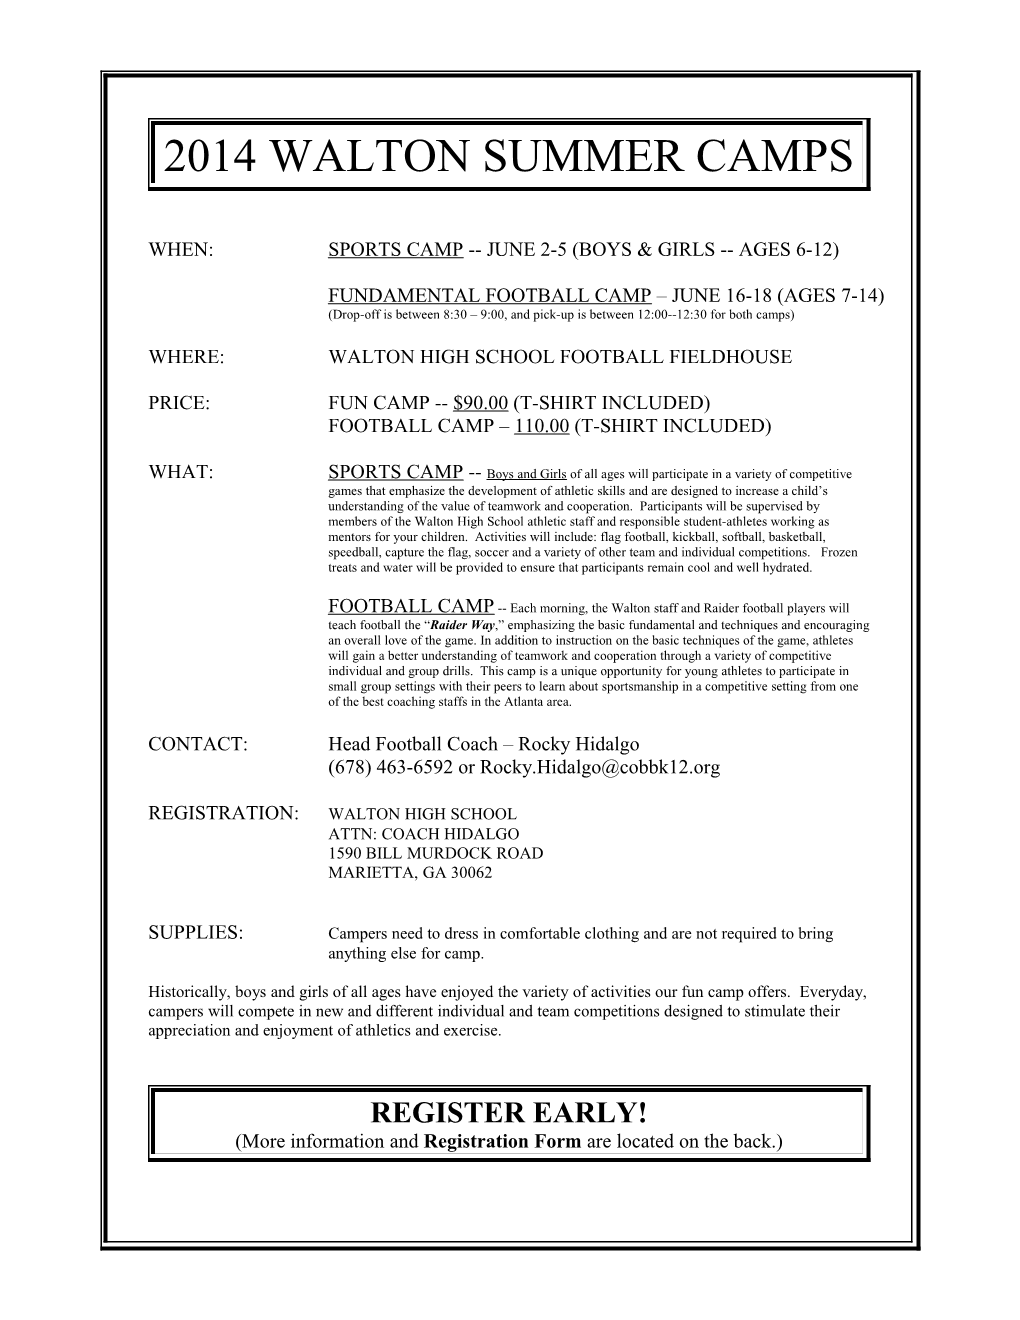 When: Sports Camp June 2-5 (Boys & Girls Ages 6-12)